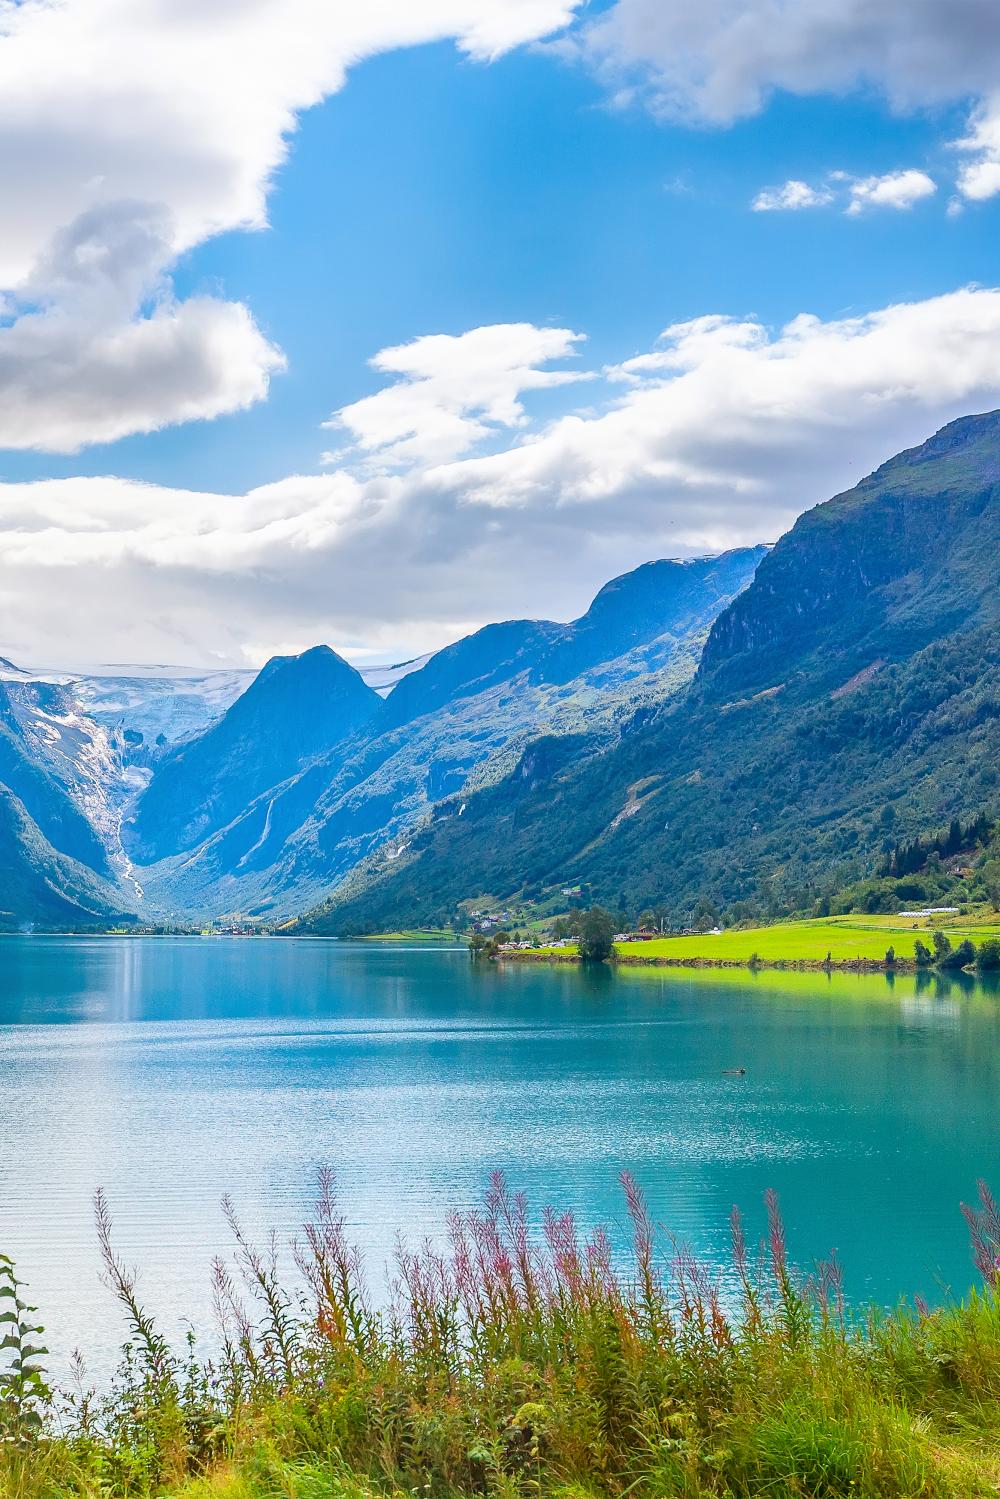 The environment is considered with such high regard in Norway that policy makers have created an actual Climate Budget through which Oslo can set out to achieve its ambitious goals